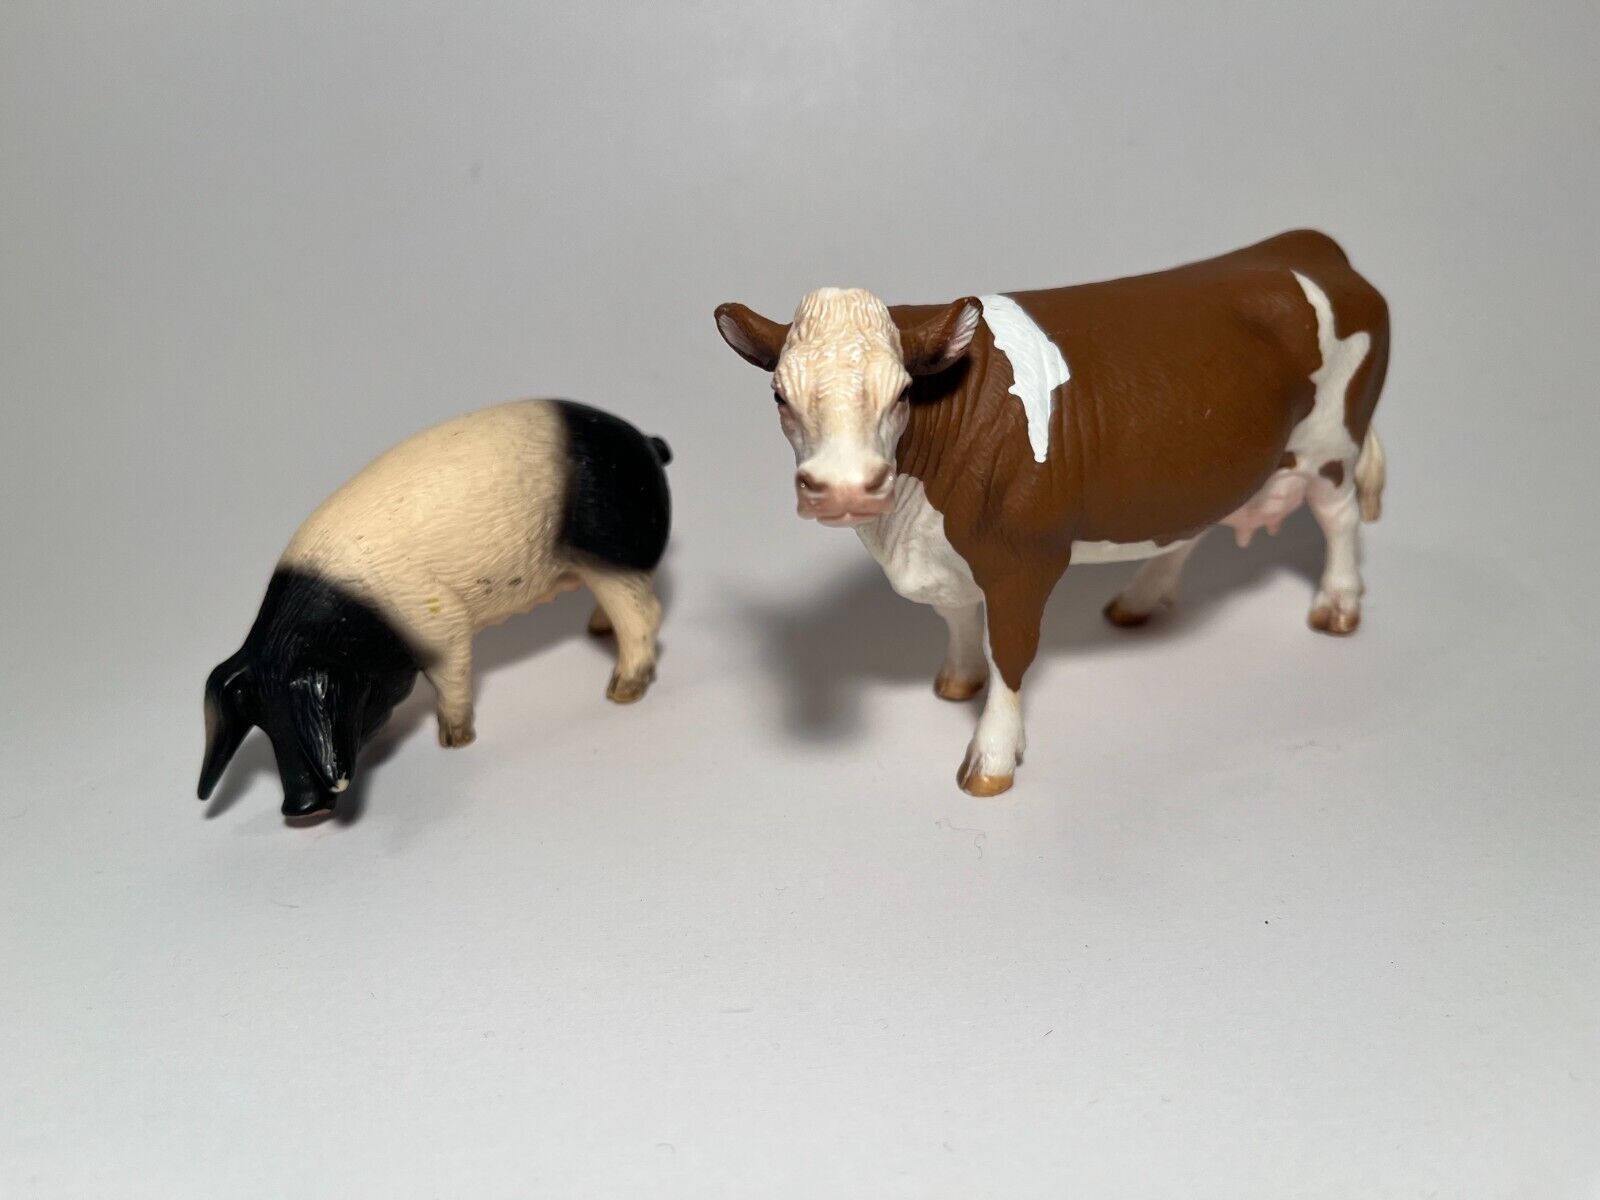 Schleich Germany, TOYSMITH High Quality Realistic Artwork Animals Collection Schleich Germany, TOYSMITH Schleich Germany - фотография #5